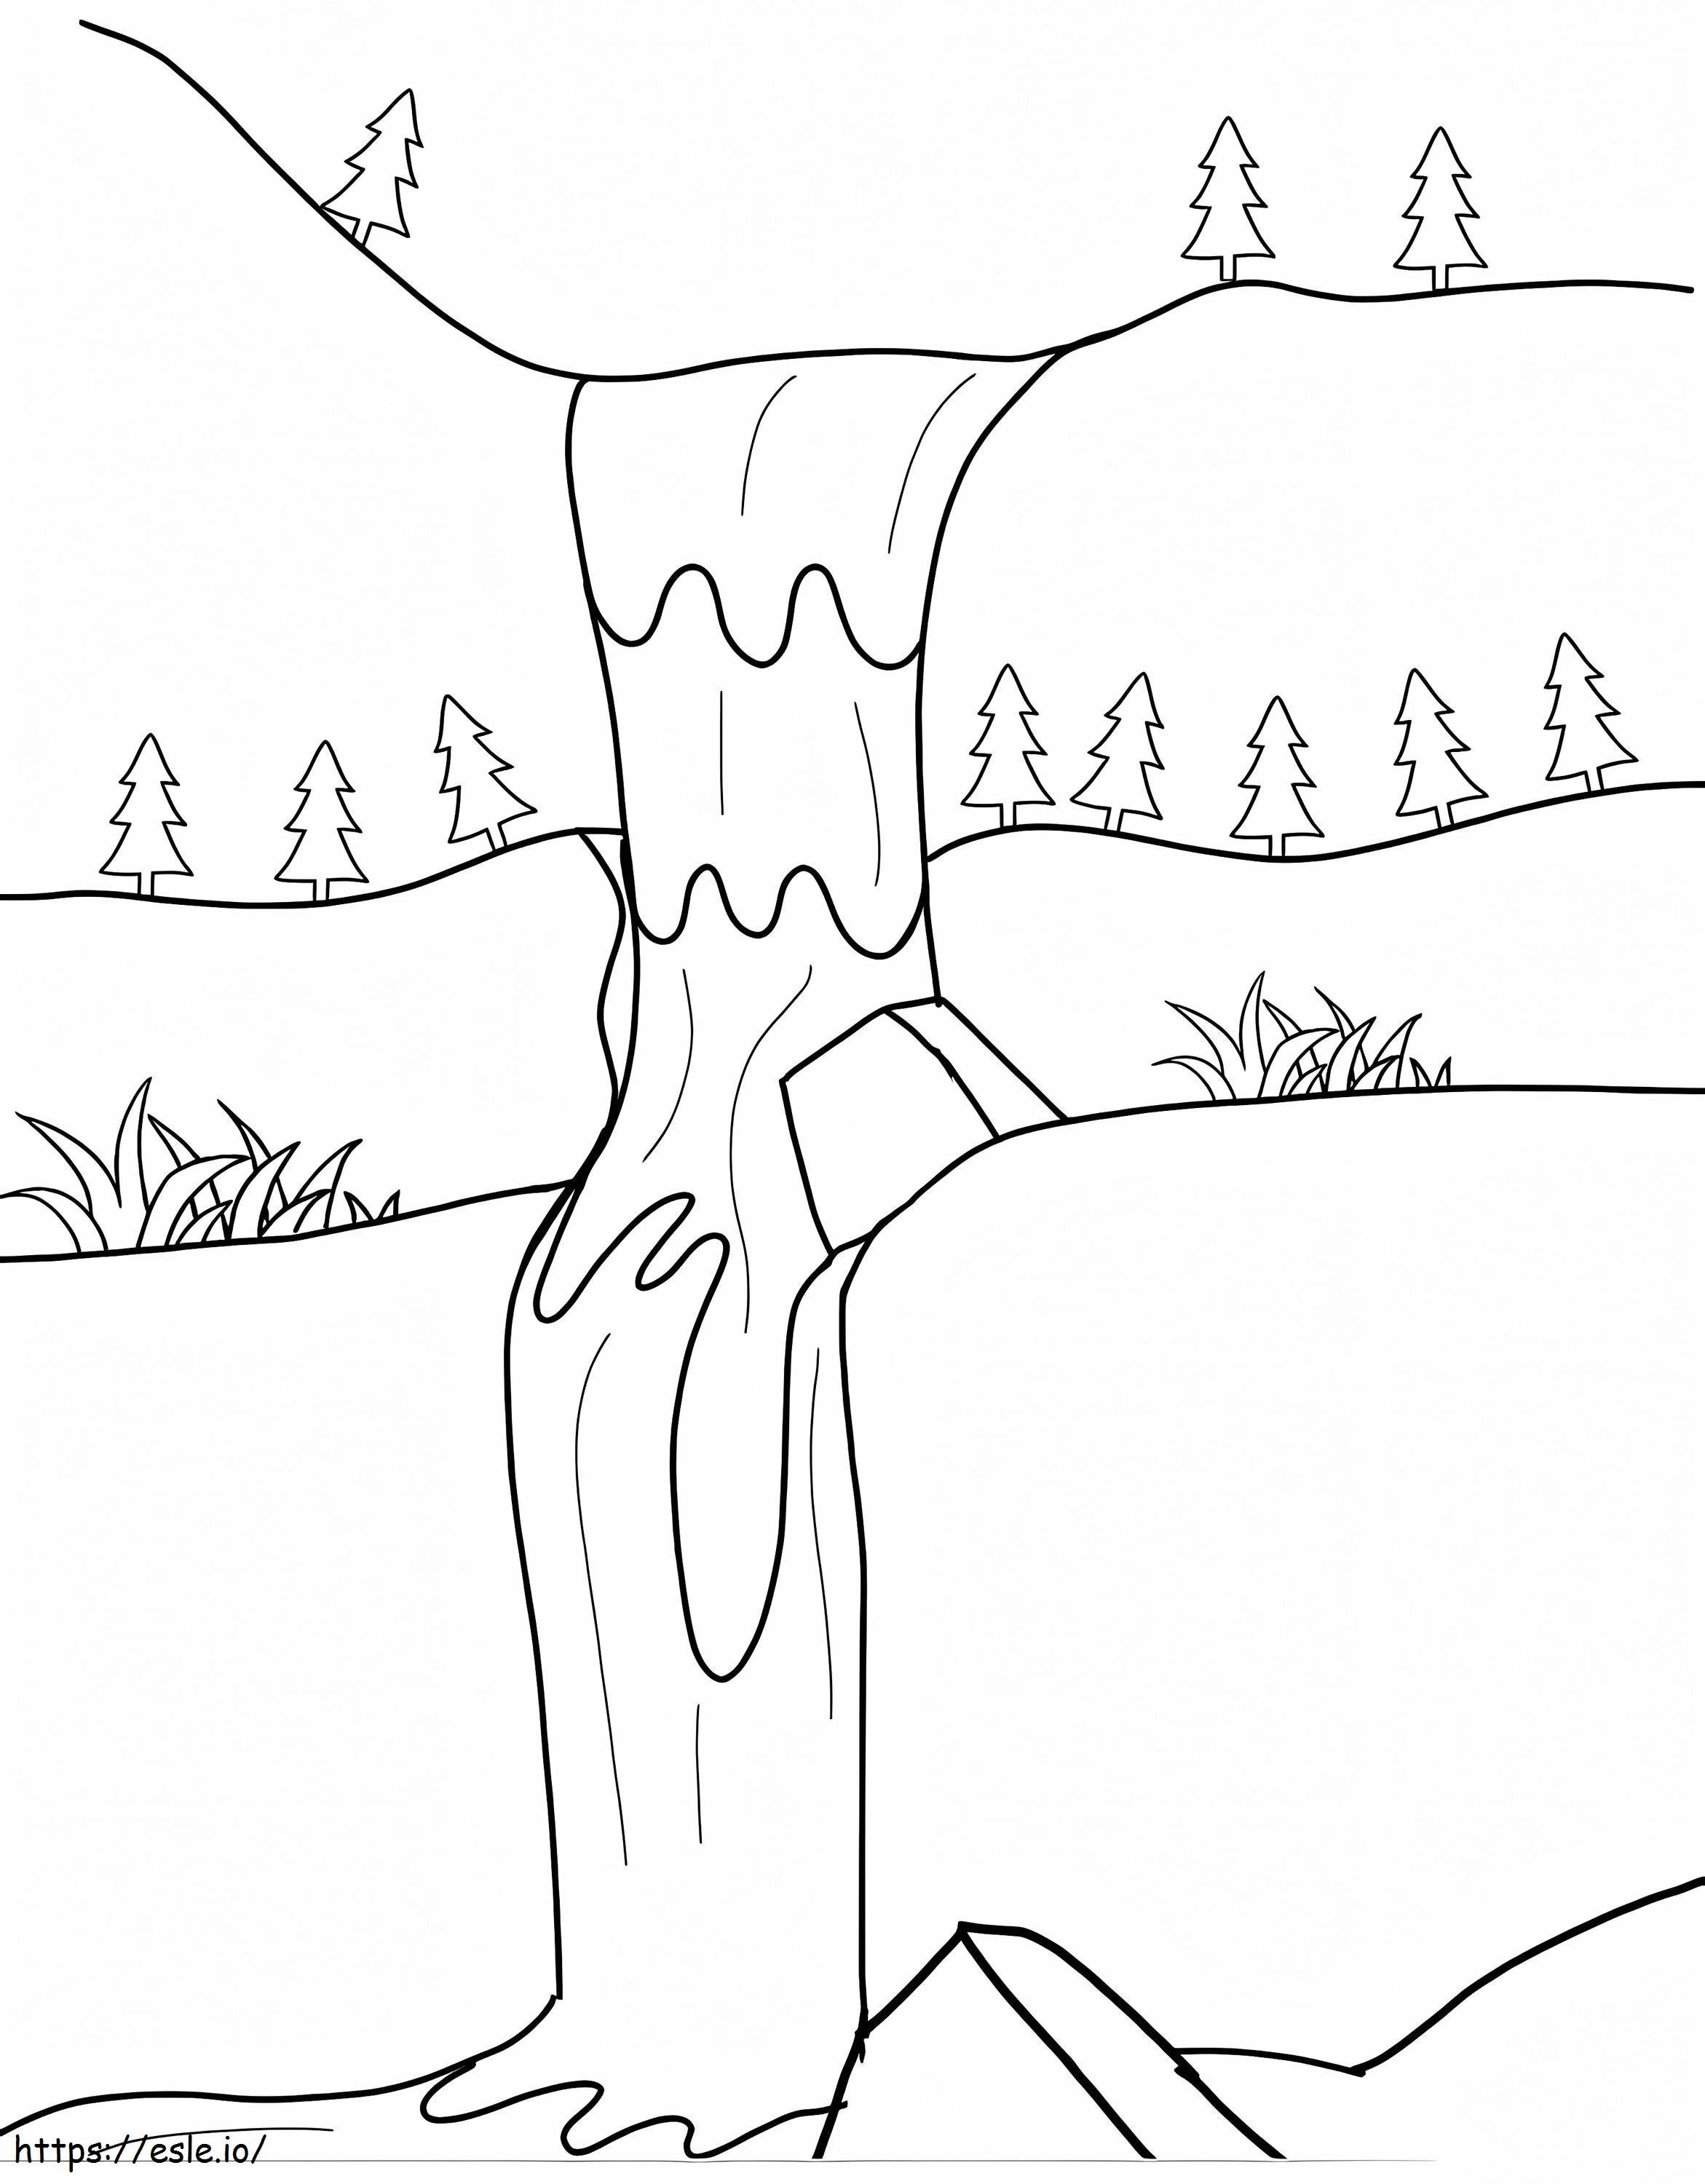 Waterfall 9 coloring page